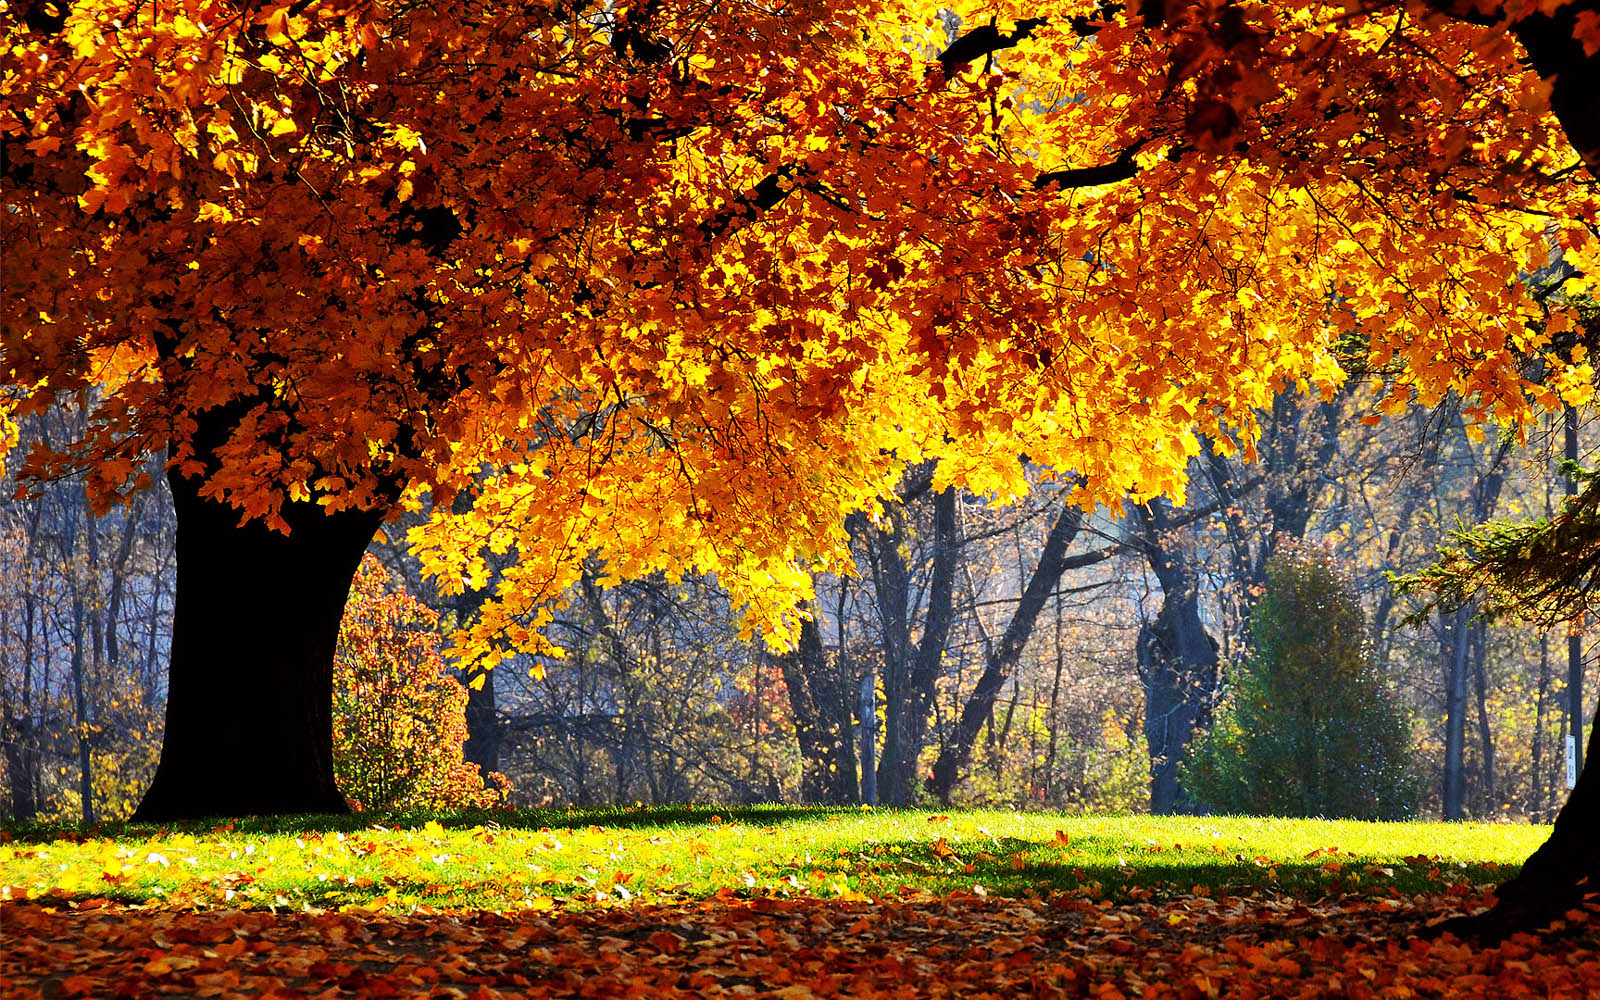 Autumn Scenery Wallpaper Background Photos Image And Pictures